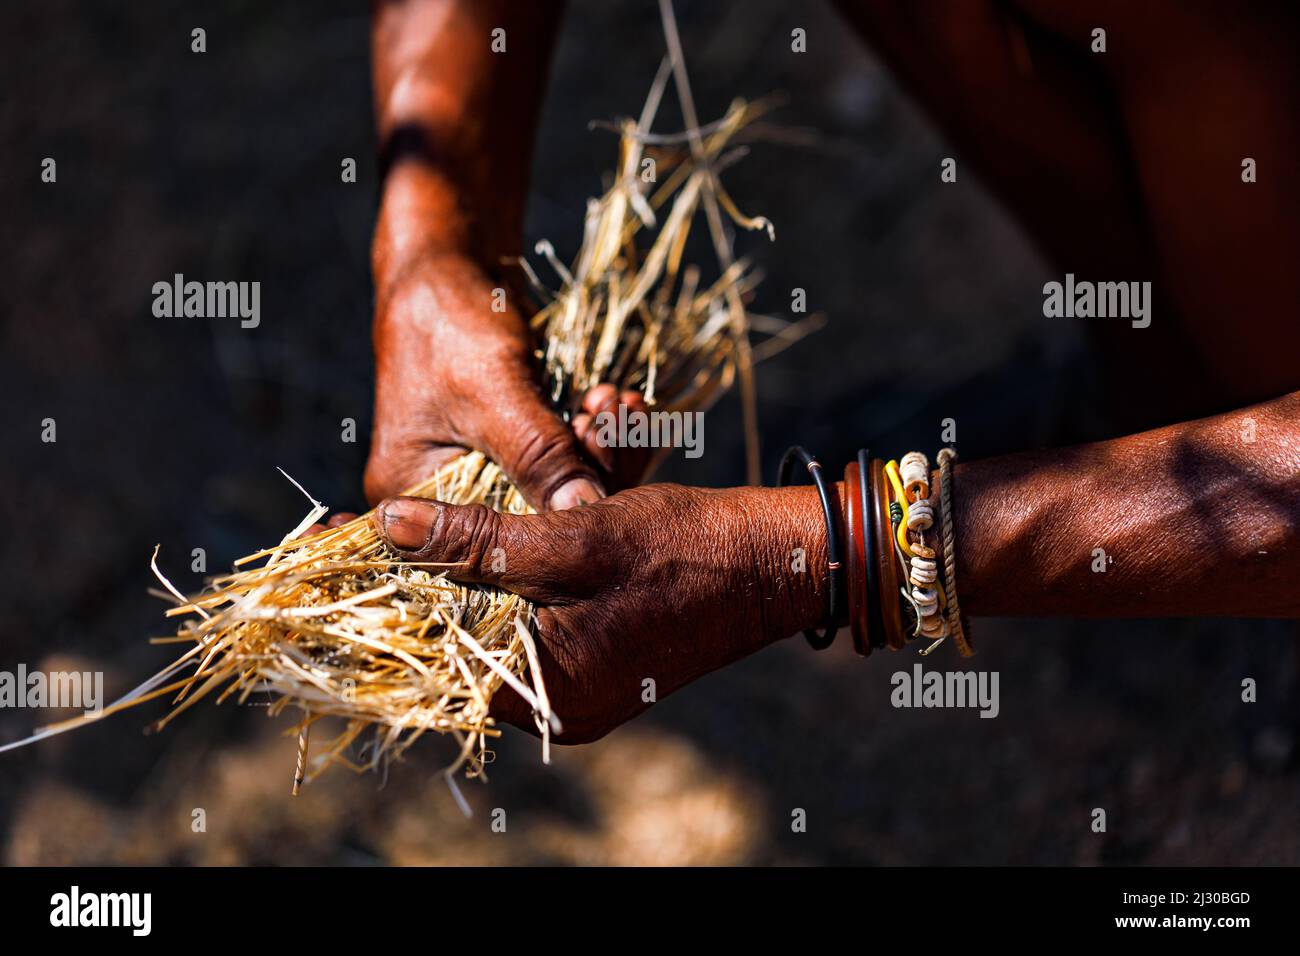 An old man with distinctive hands collects straw in Namibia, Africa Stock Photo